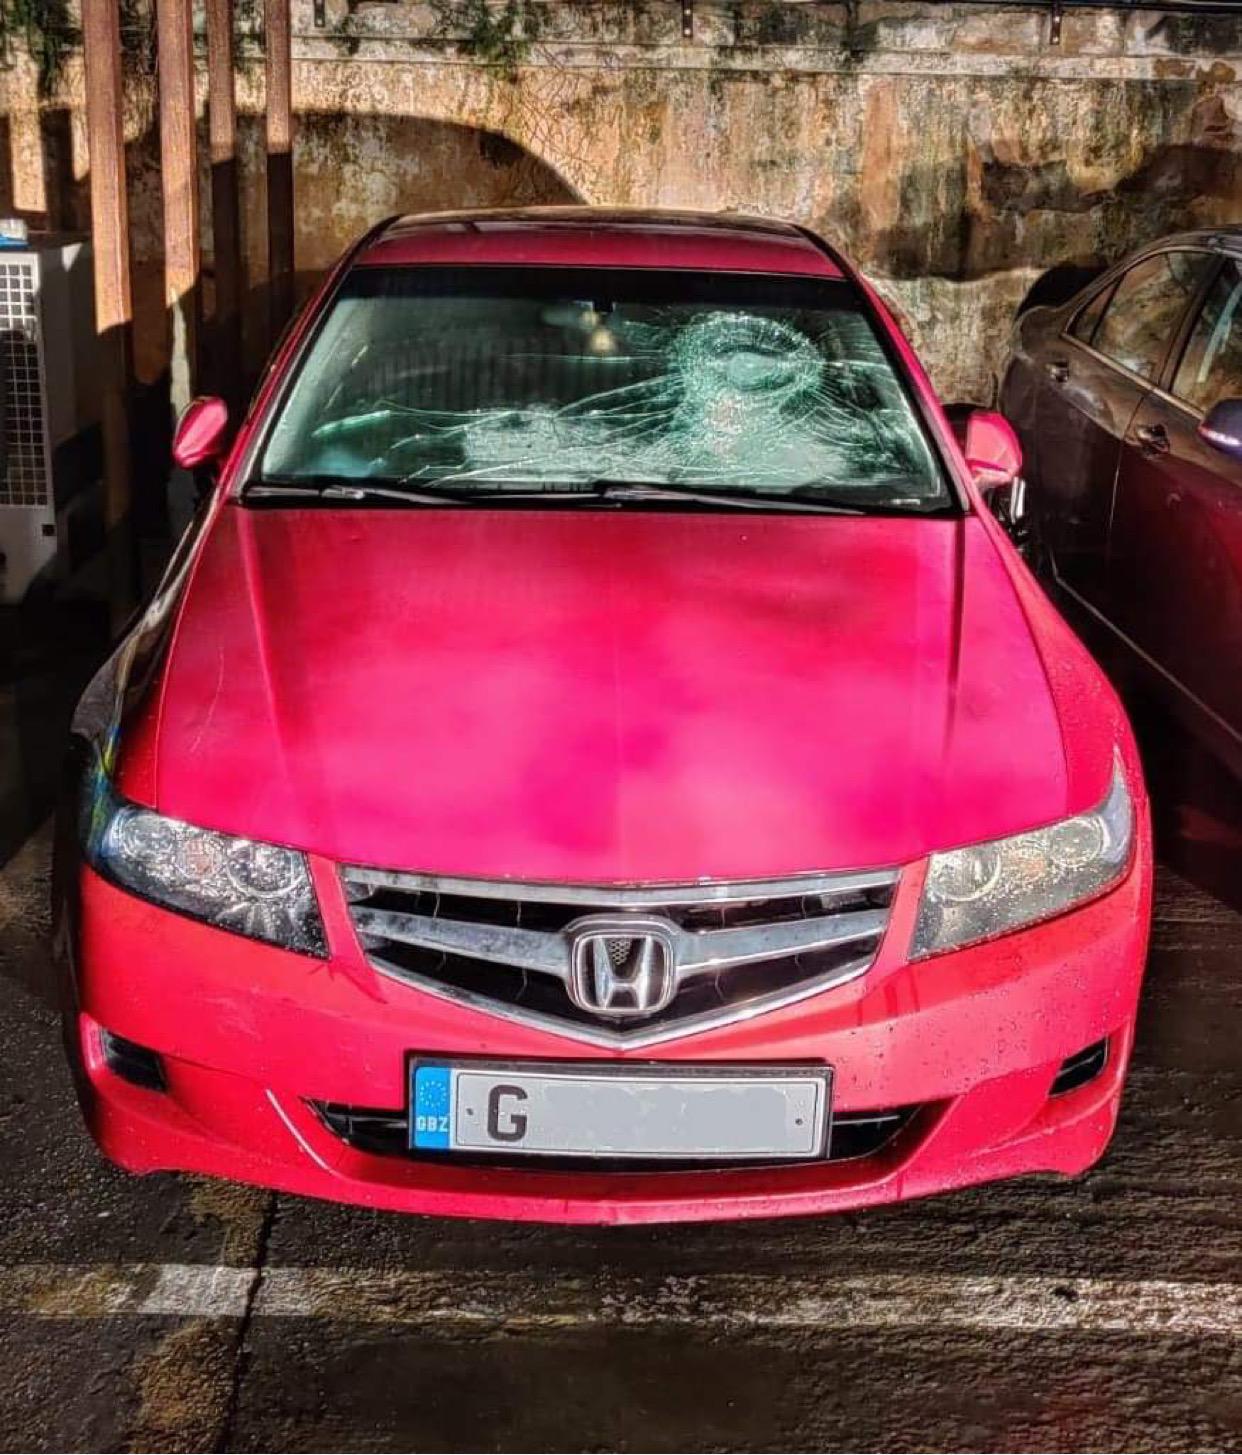 The Honda Accord motor car with a damaged windscreen following the collision with an RGP patrol vehicle.